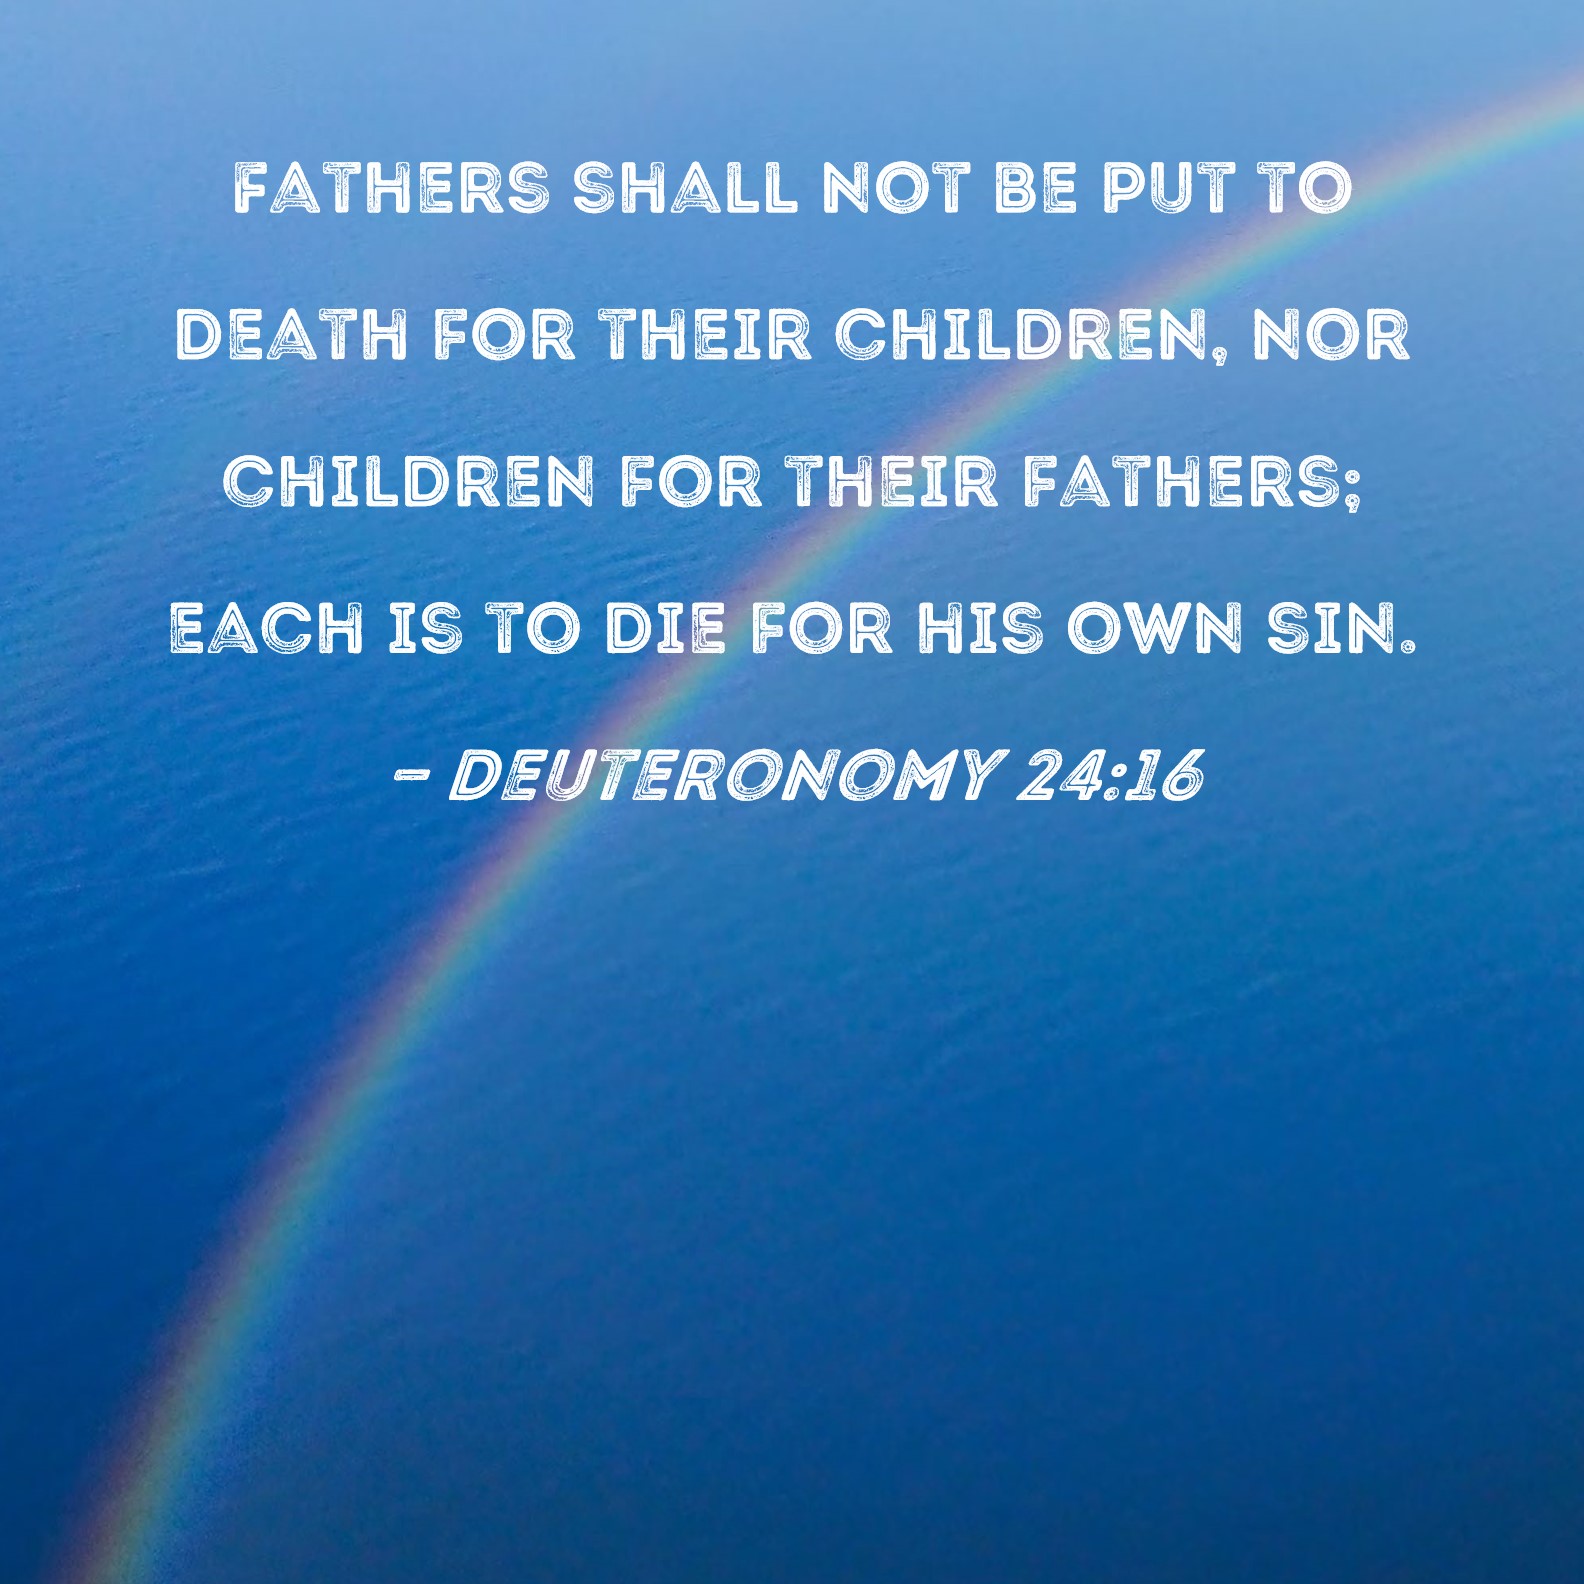 Deuteronomy 24:16 Fathers shall not be put to death for their